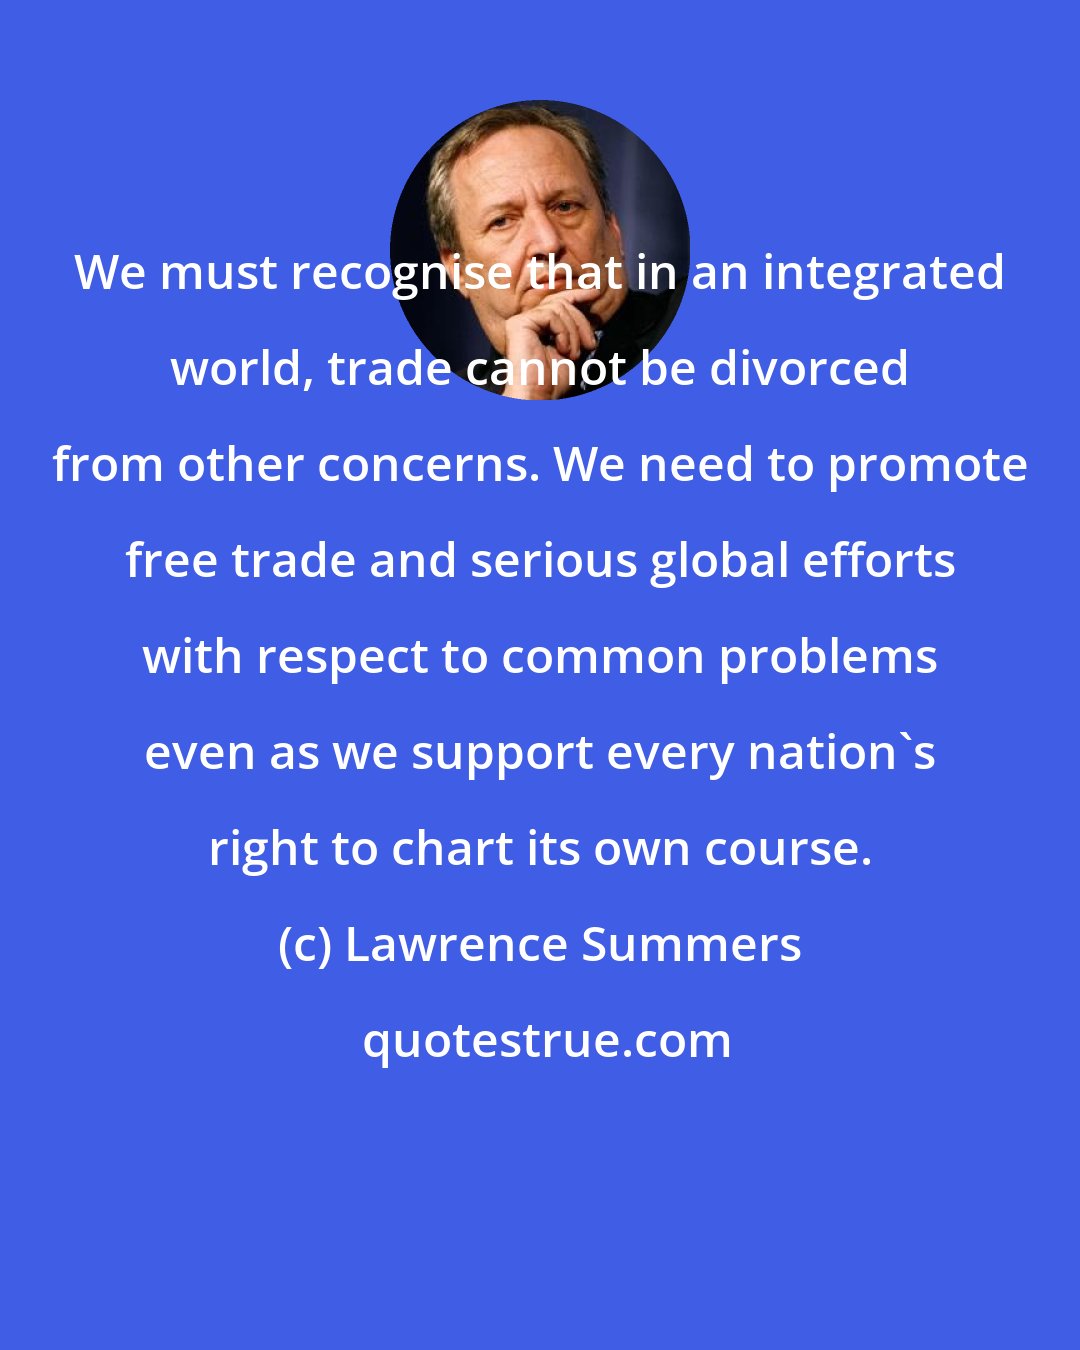 Lawrence Summers: We must recognise that in an integrated world, trade cannot be divorced from other concerns. We need to promote free trade and serious global efforts with respect to common problems even as we support every nation's right to chart its own course.